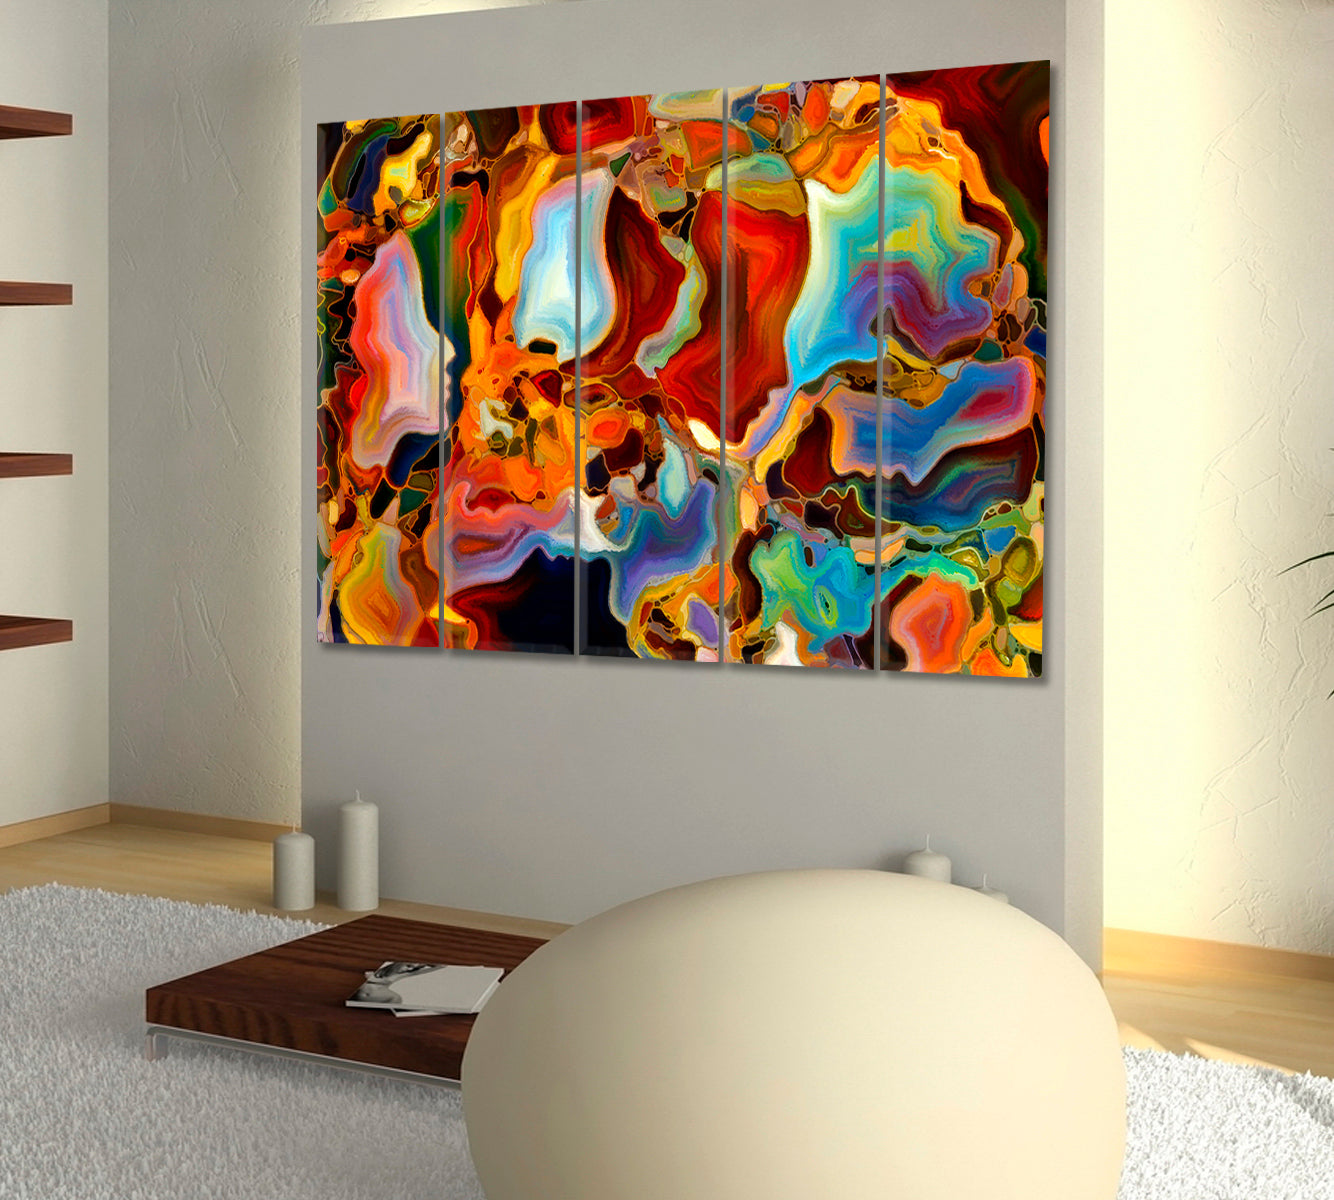 Human Mind Colorful Abstract Shapes Abstract Art Print Artesty 5 panels 36" x 24" 